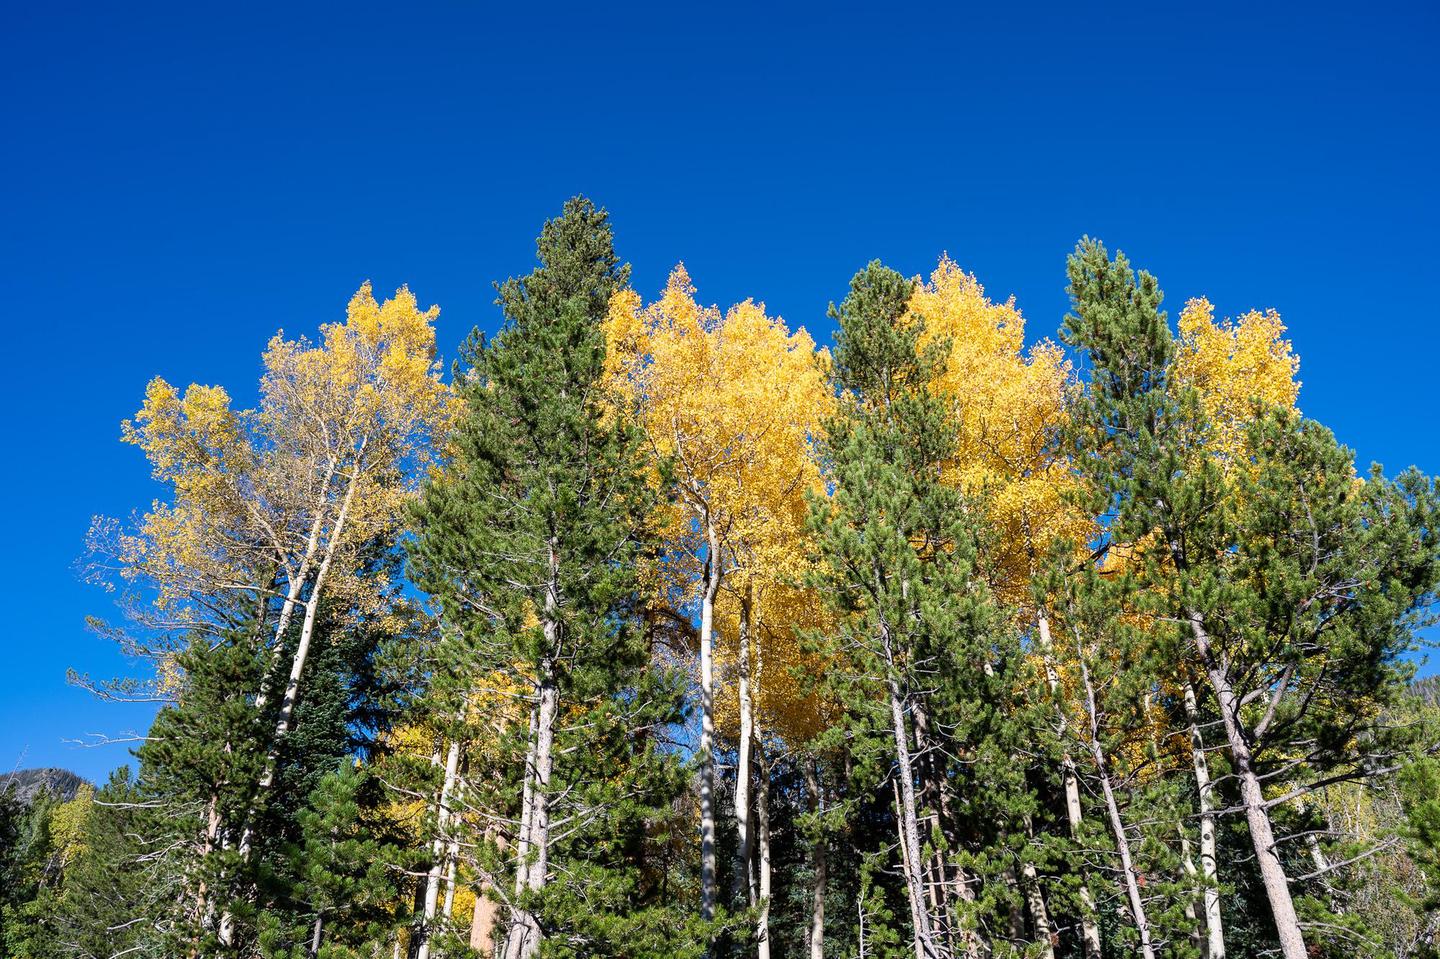 Aspen and transitioning from green to goldAspen leaves are turning from green to gold